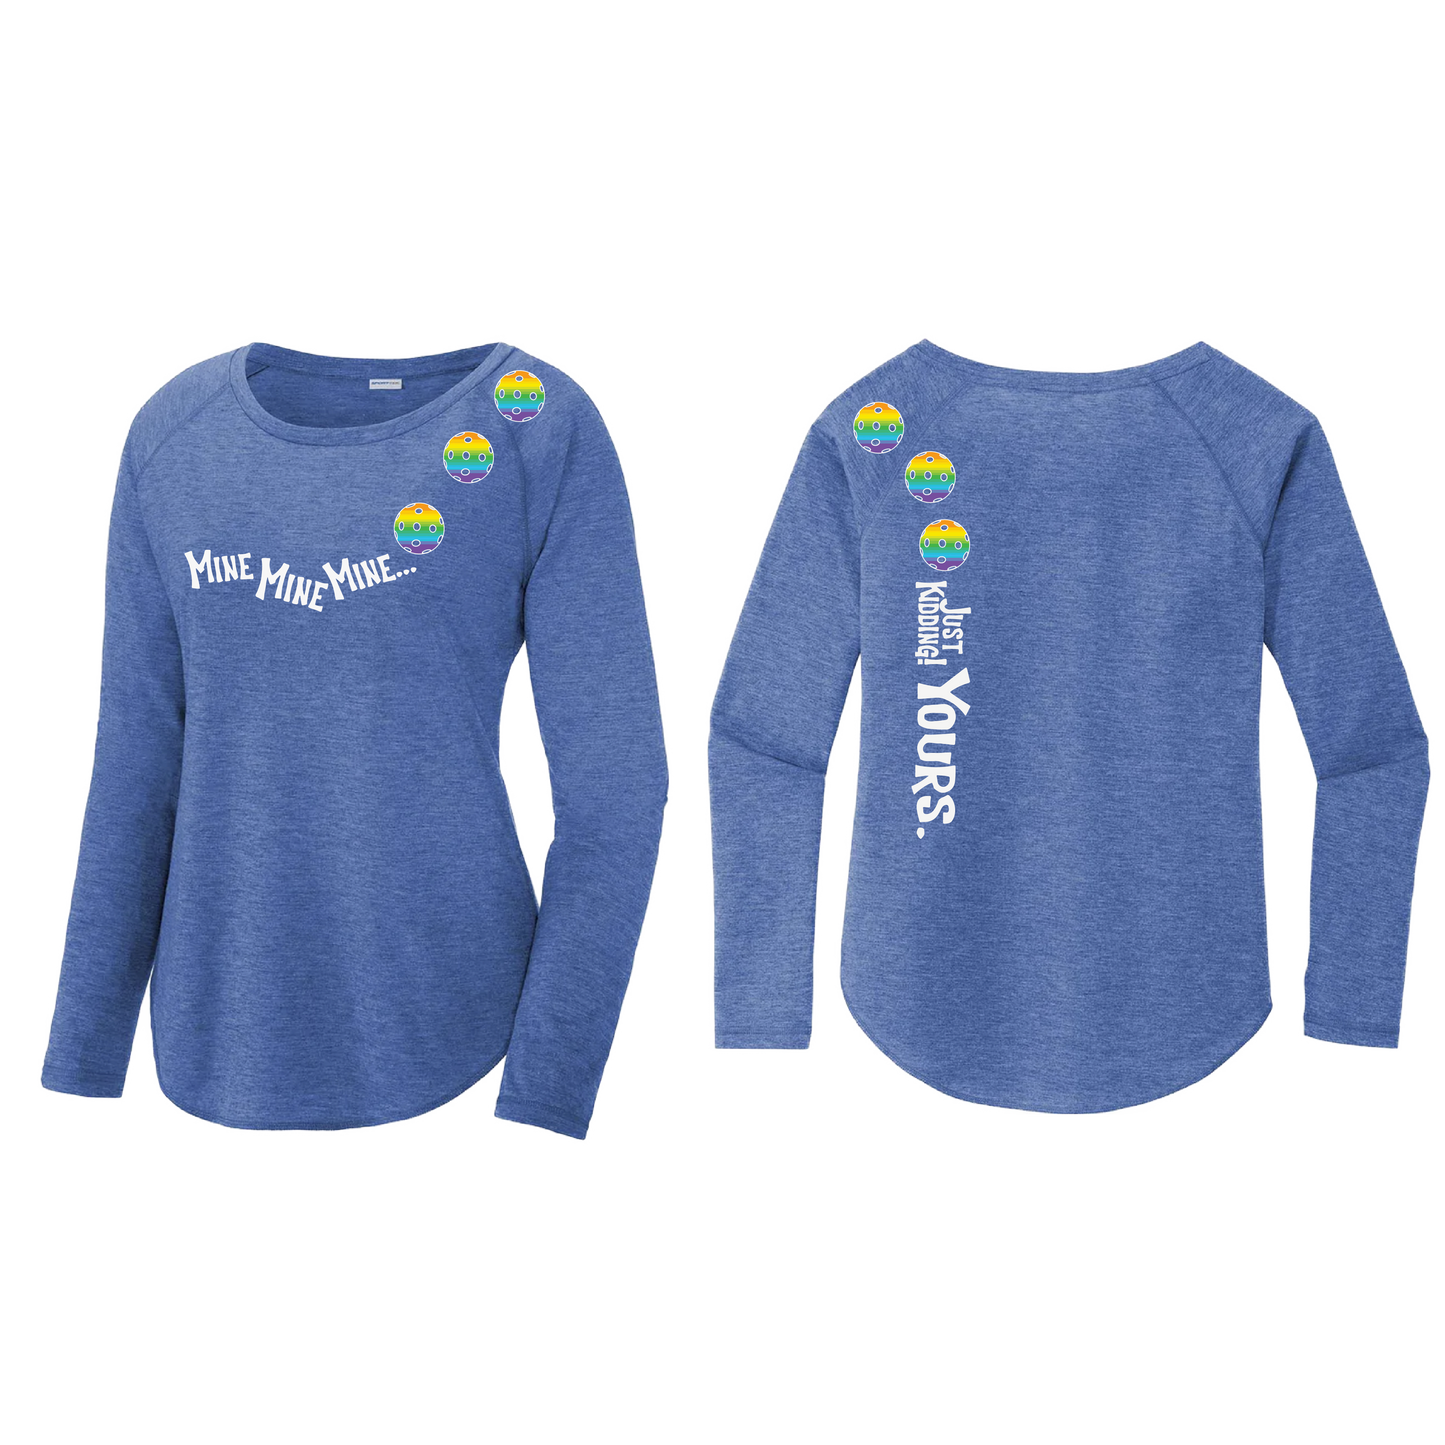 Mine JK Yours (Pickleball colors Green Rainbow Cyan or Pink)| Women's Long Sleeve Scoop Neck Pickleball Shirts | 75/13/12 poly/cotton/rayon